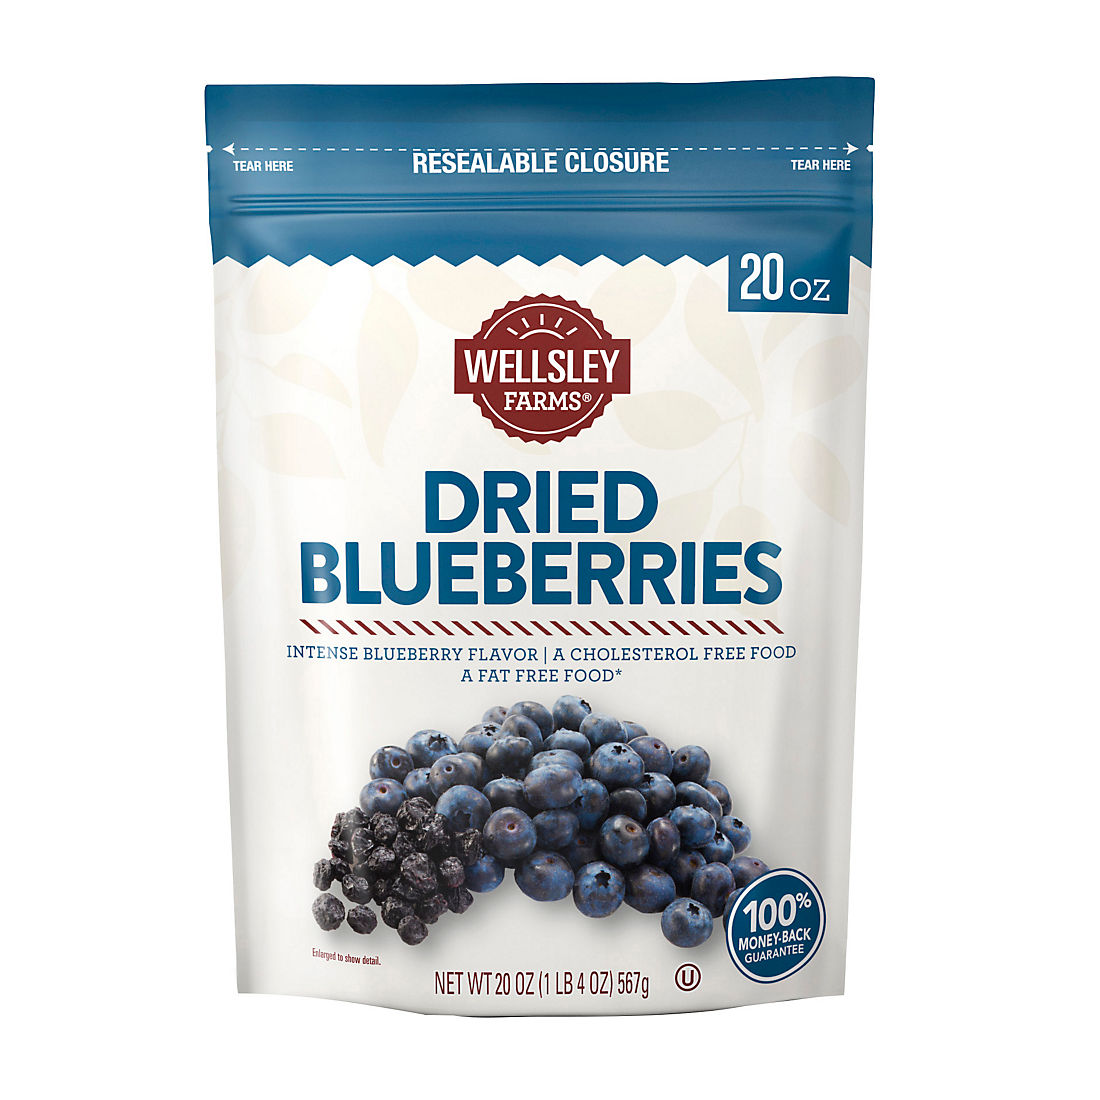 Wellsley Farms Dried Blueberries 20 Oz Bjs Wholesale Club - hover to zoom